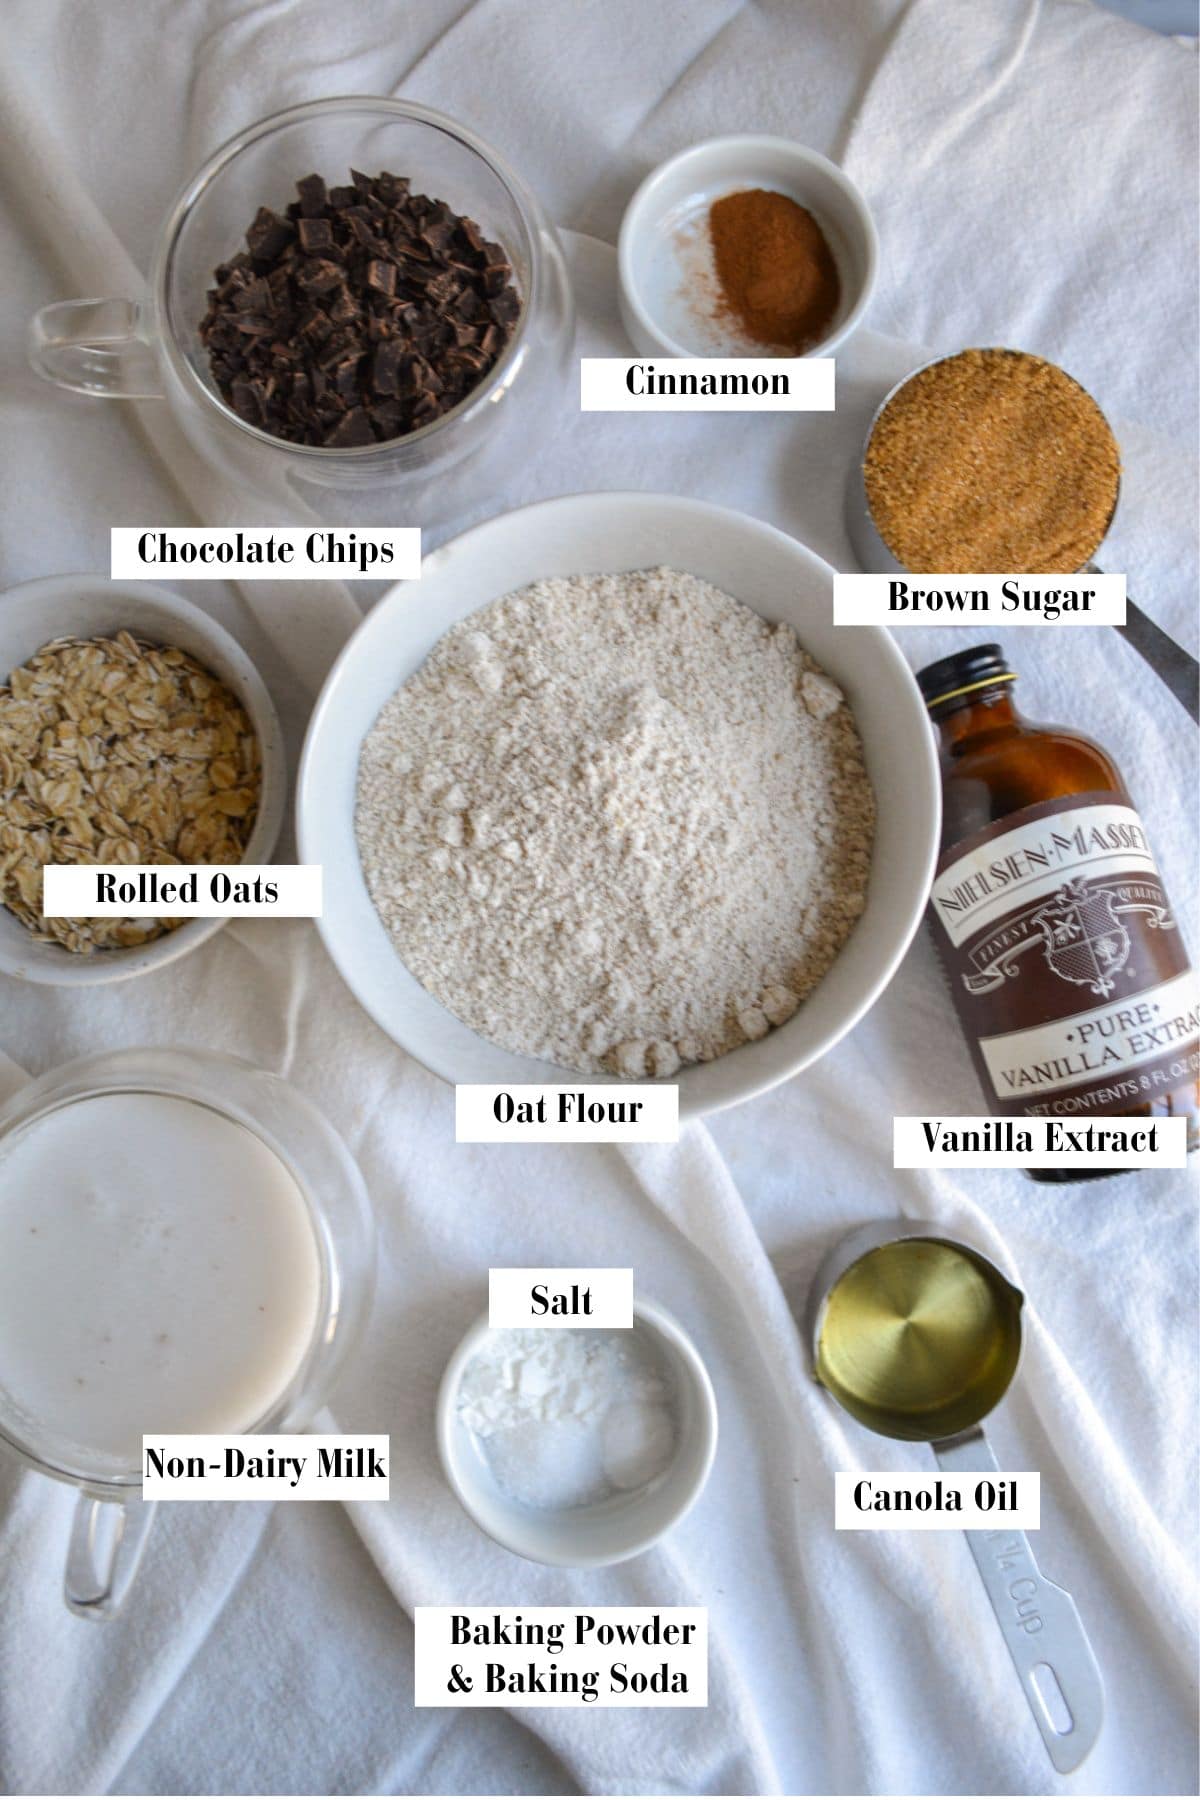 Overhead photo of ingredients needed to make the muffins.